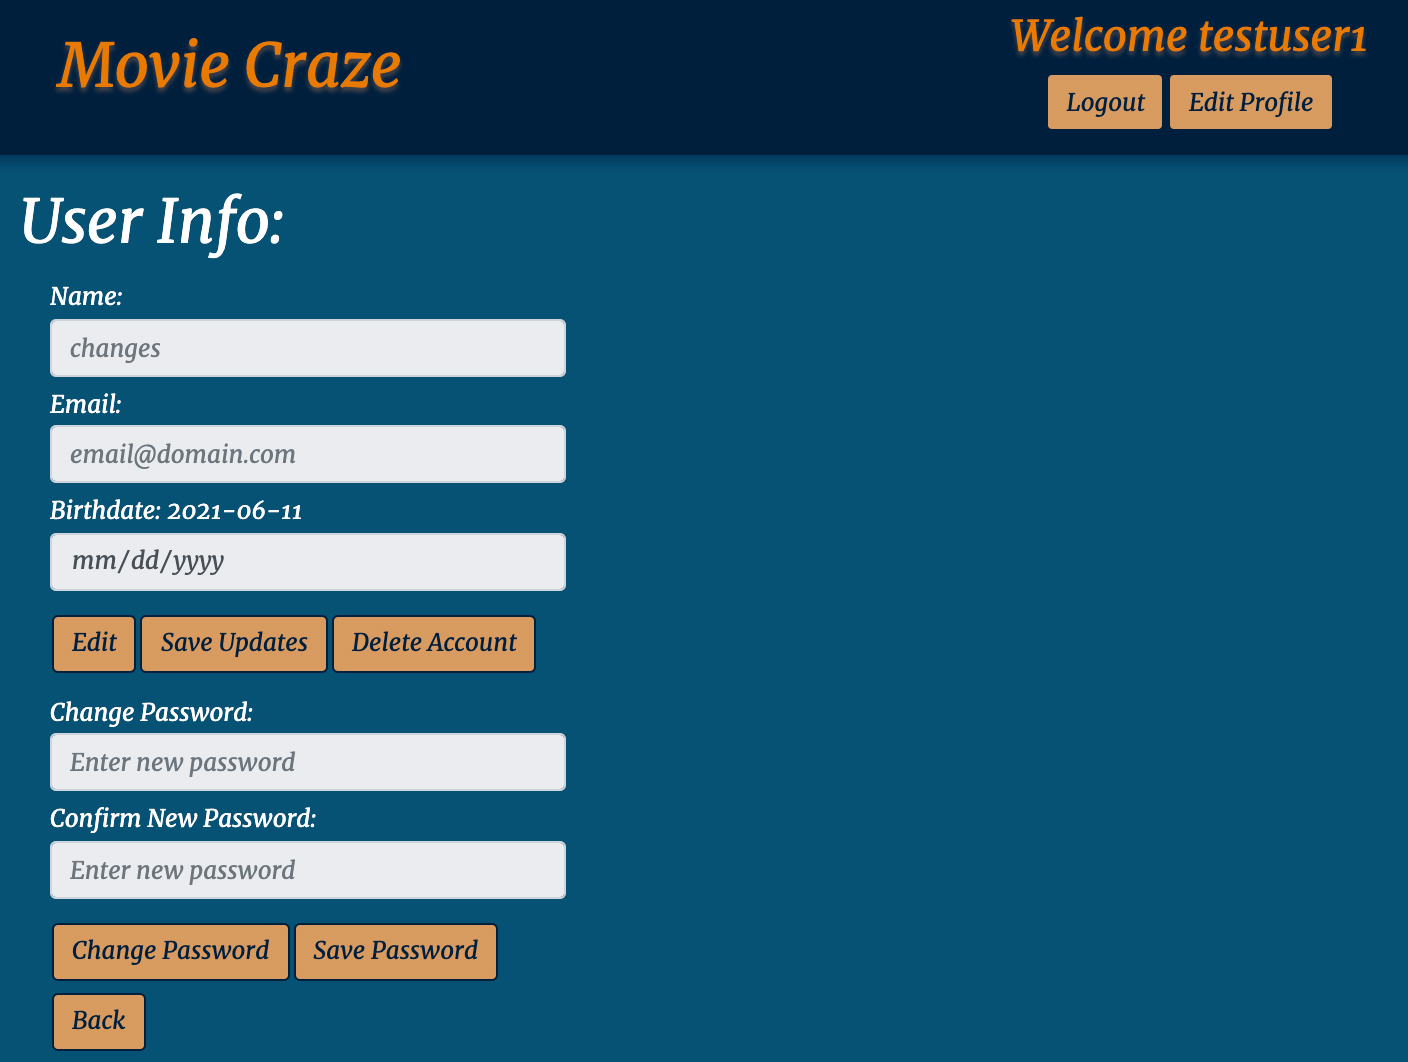 the maing page of movie craze